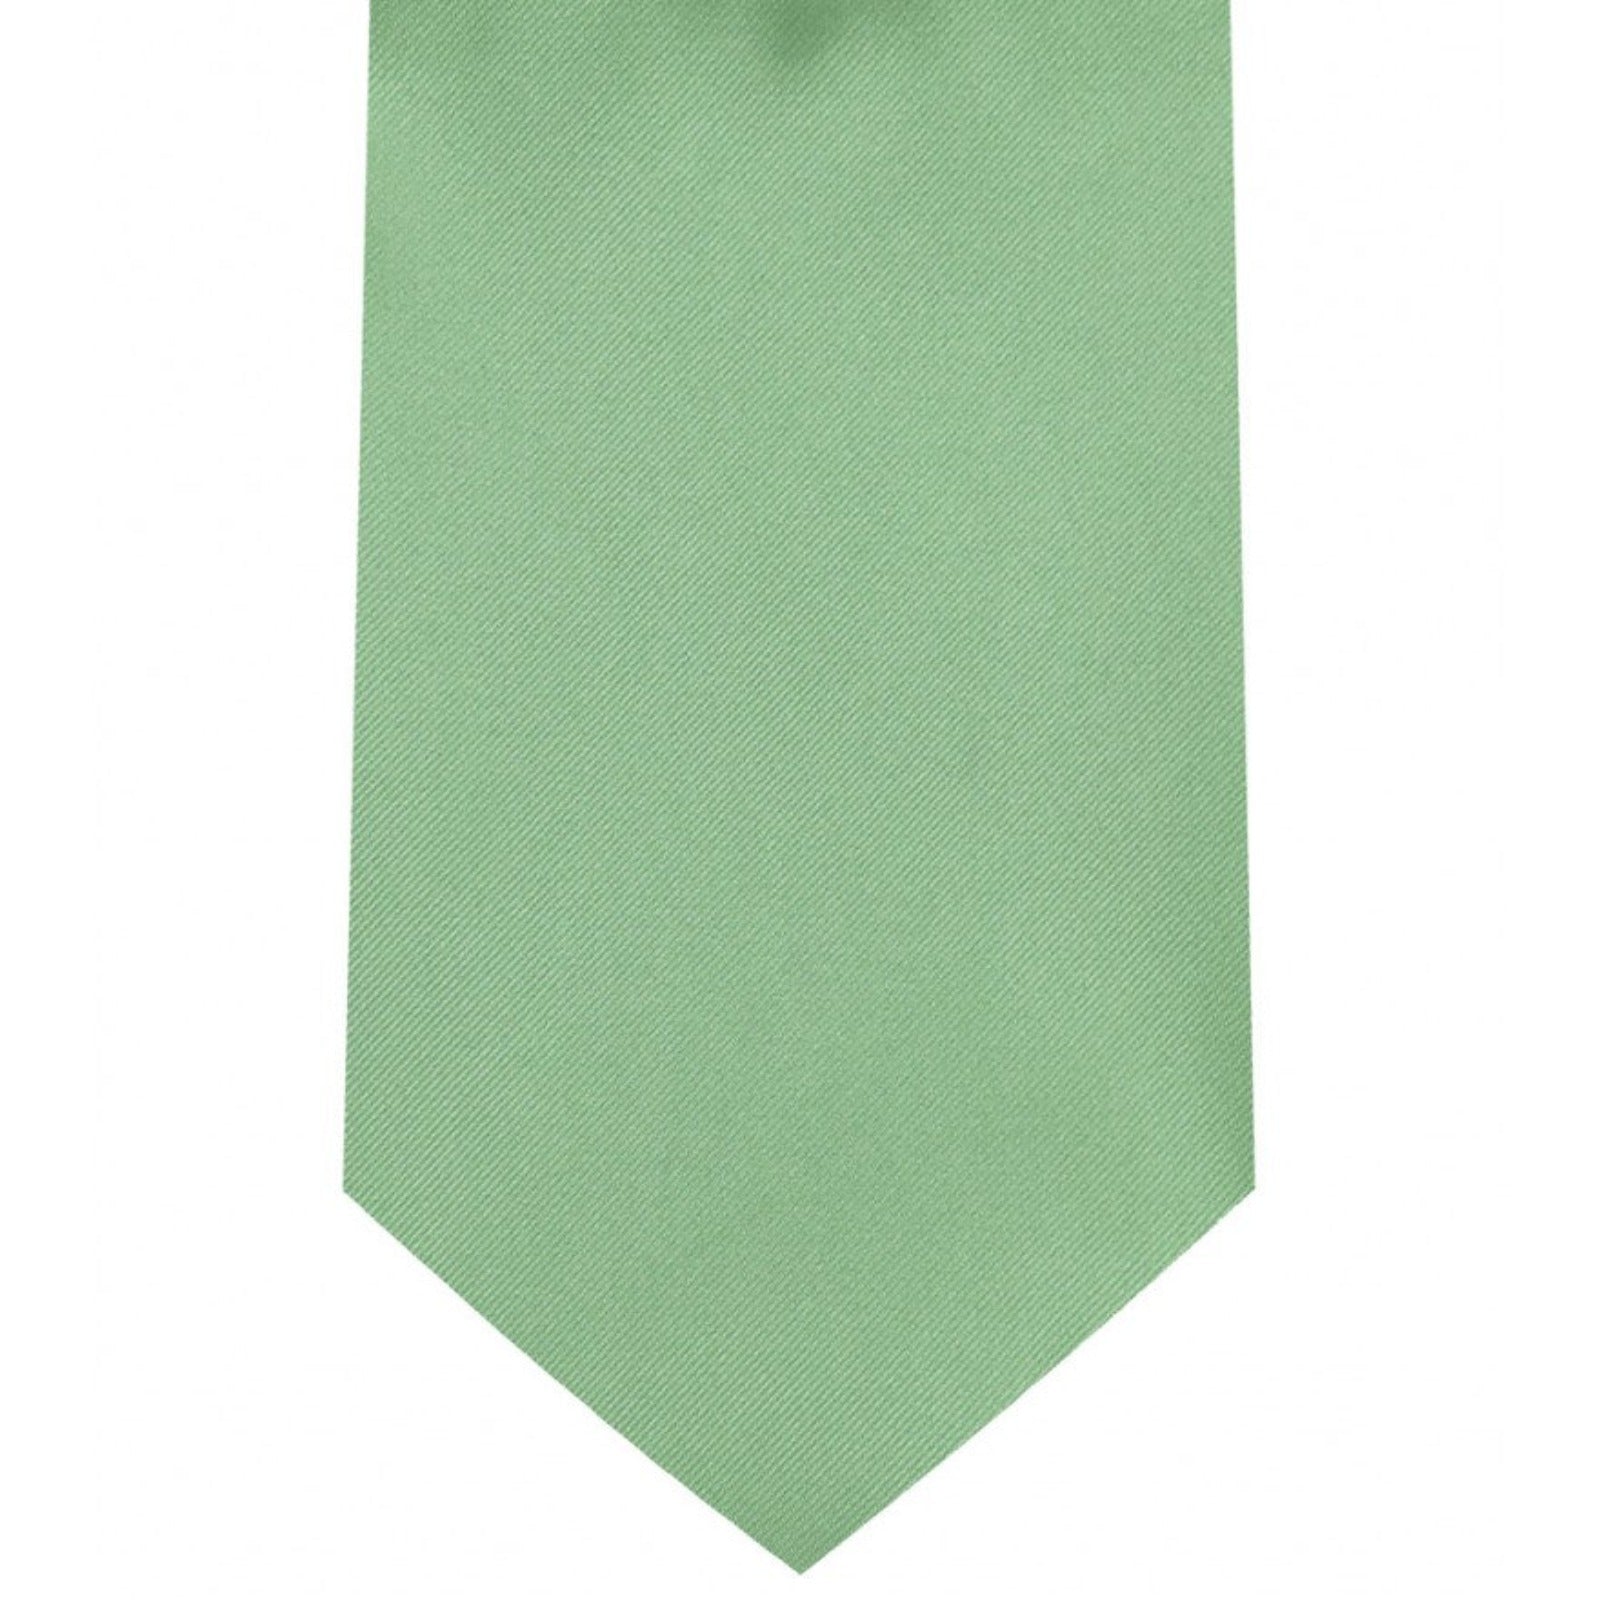 Classic Mint Tie Regular width 3.5 inches With Matching Pocket Square | KCT Menswear